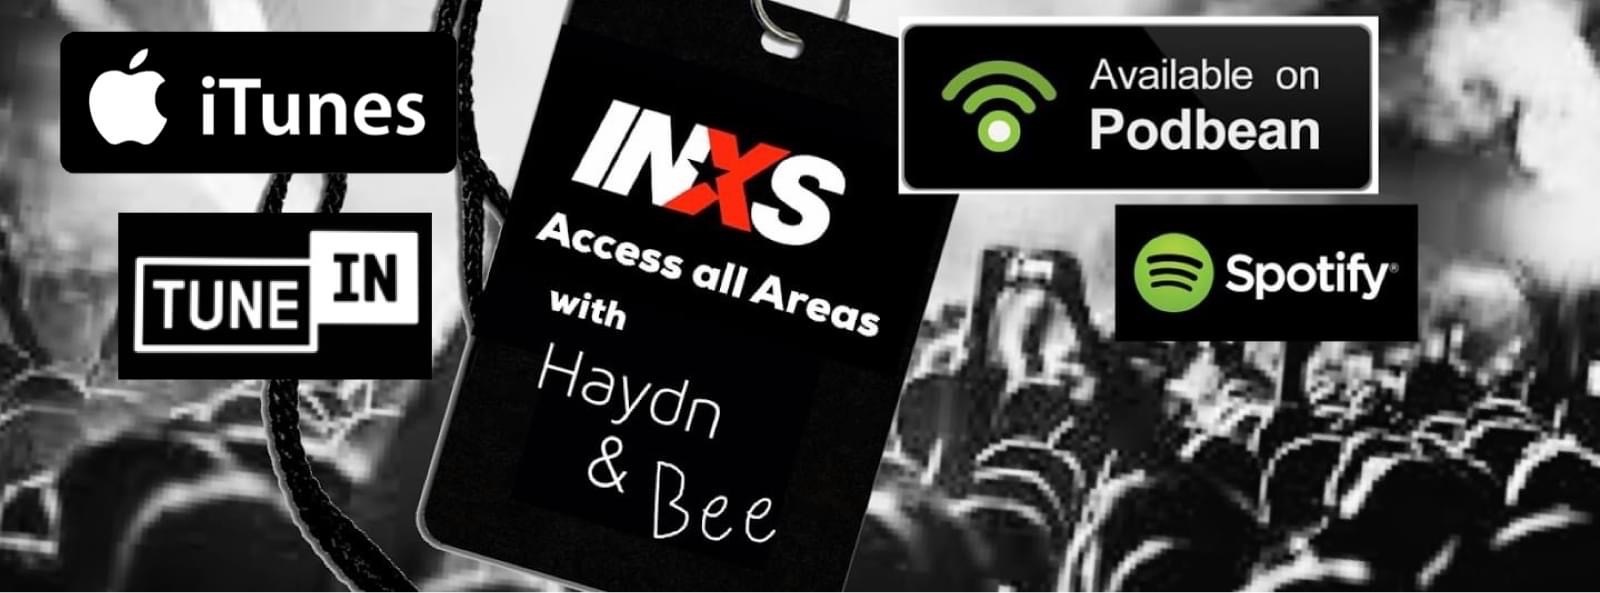 INXS: Access All Areas header image 1